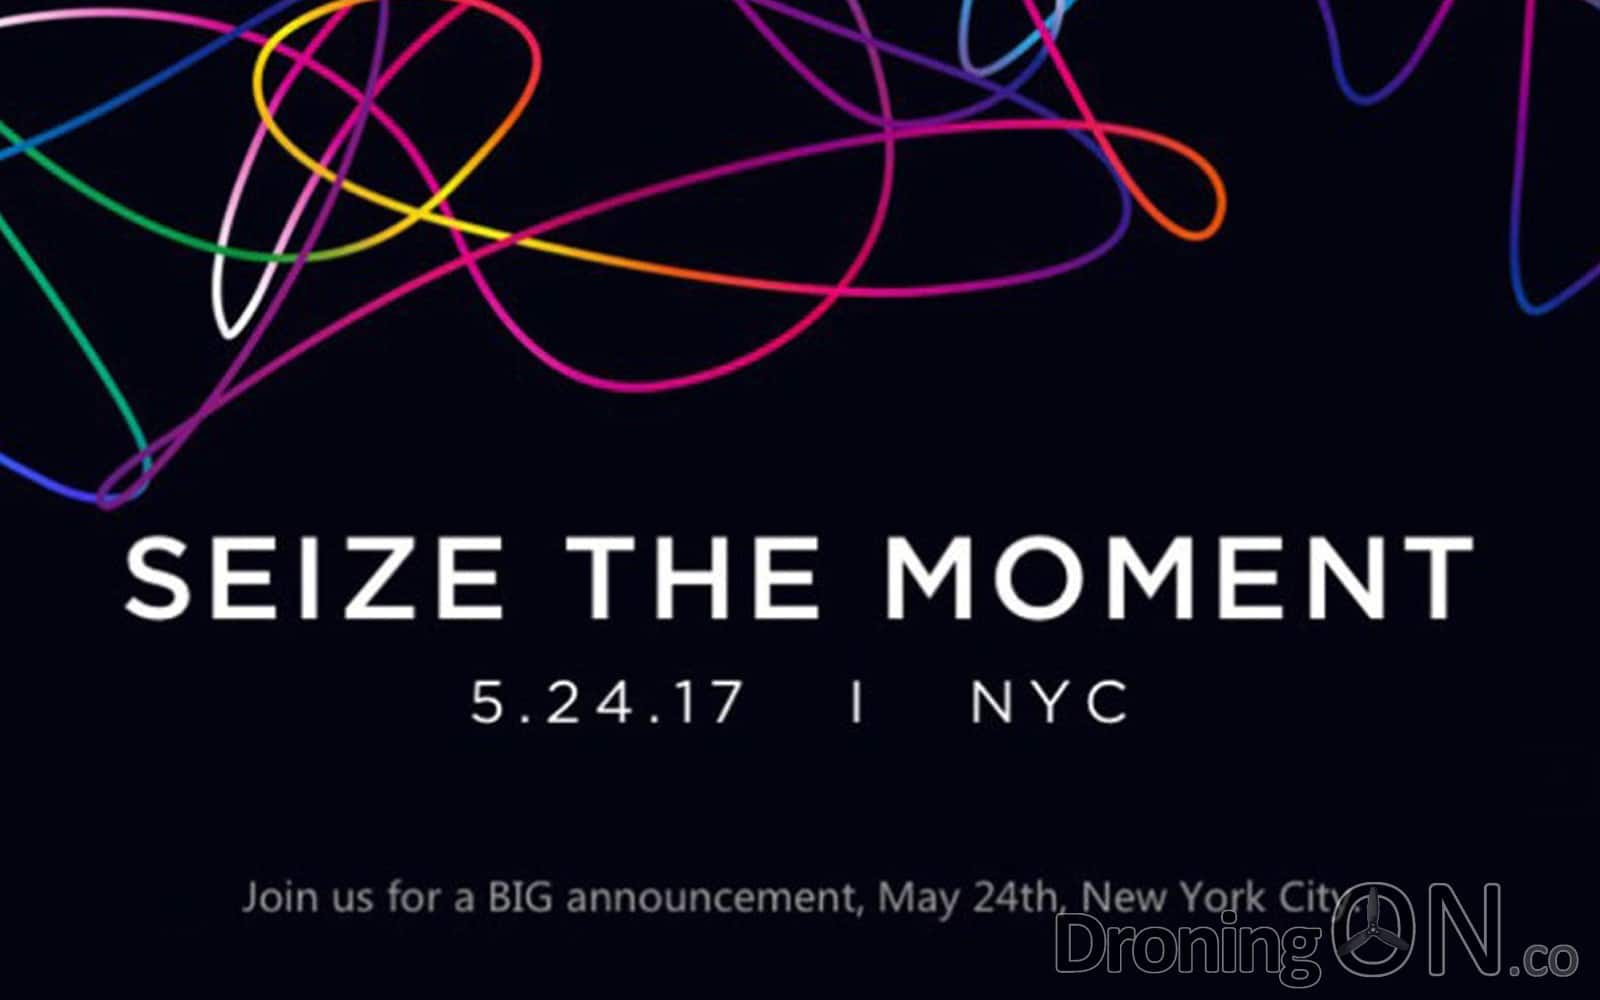 DJI "Seize The Moment", awaiting the forthcoming announcement of the DJI Spark